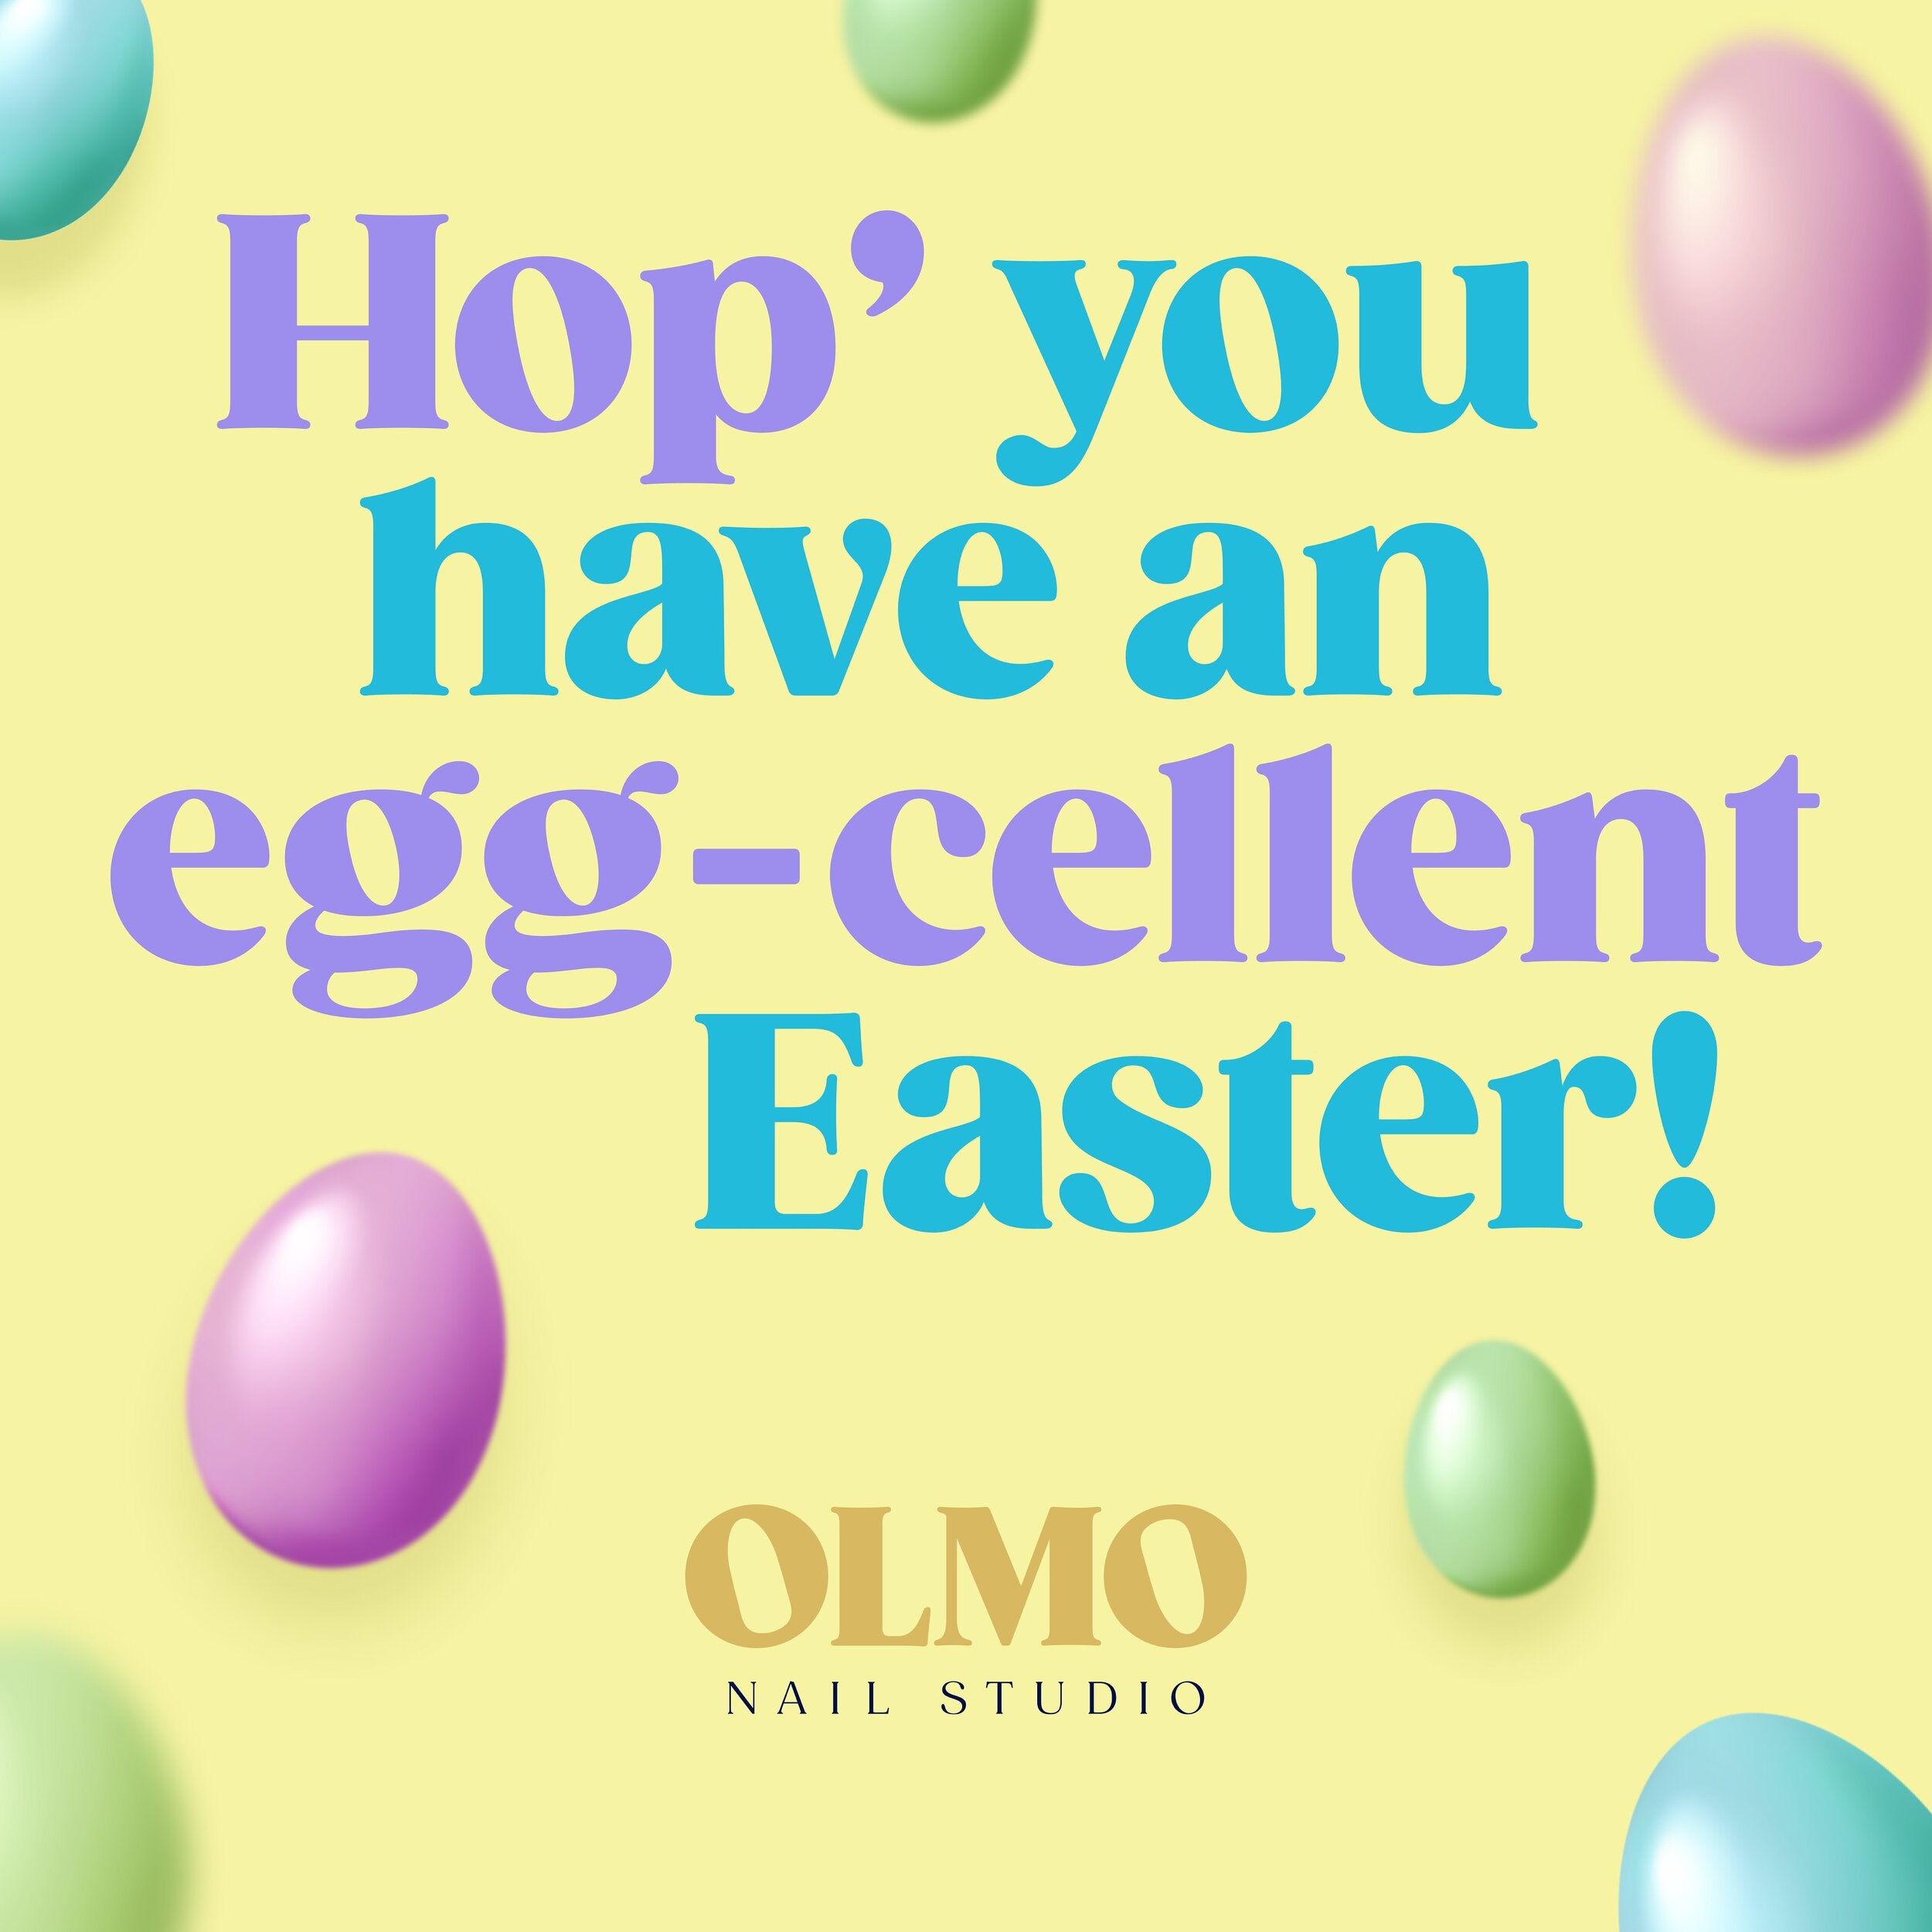 Wishing everyone a very hoppy Easter from OLMO 🐣🐰

#easter #eastersunday #easterweekend #eastereggs #easterbunny #happyeaster #easter2024 #spring #springtime #olmo #olmonailstudio #nailstudio #homesalon #nails #naturalnails #nailsofinstagram #naila